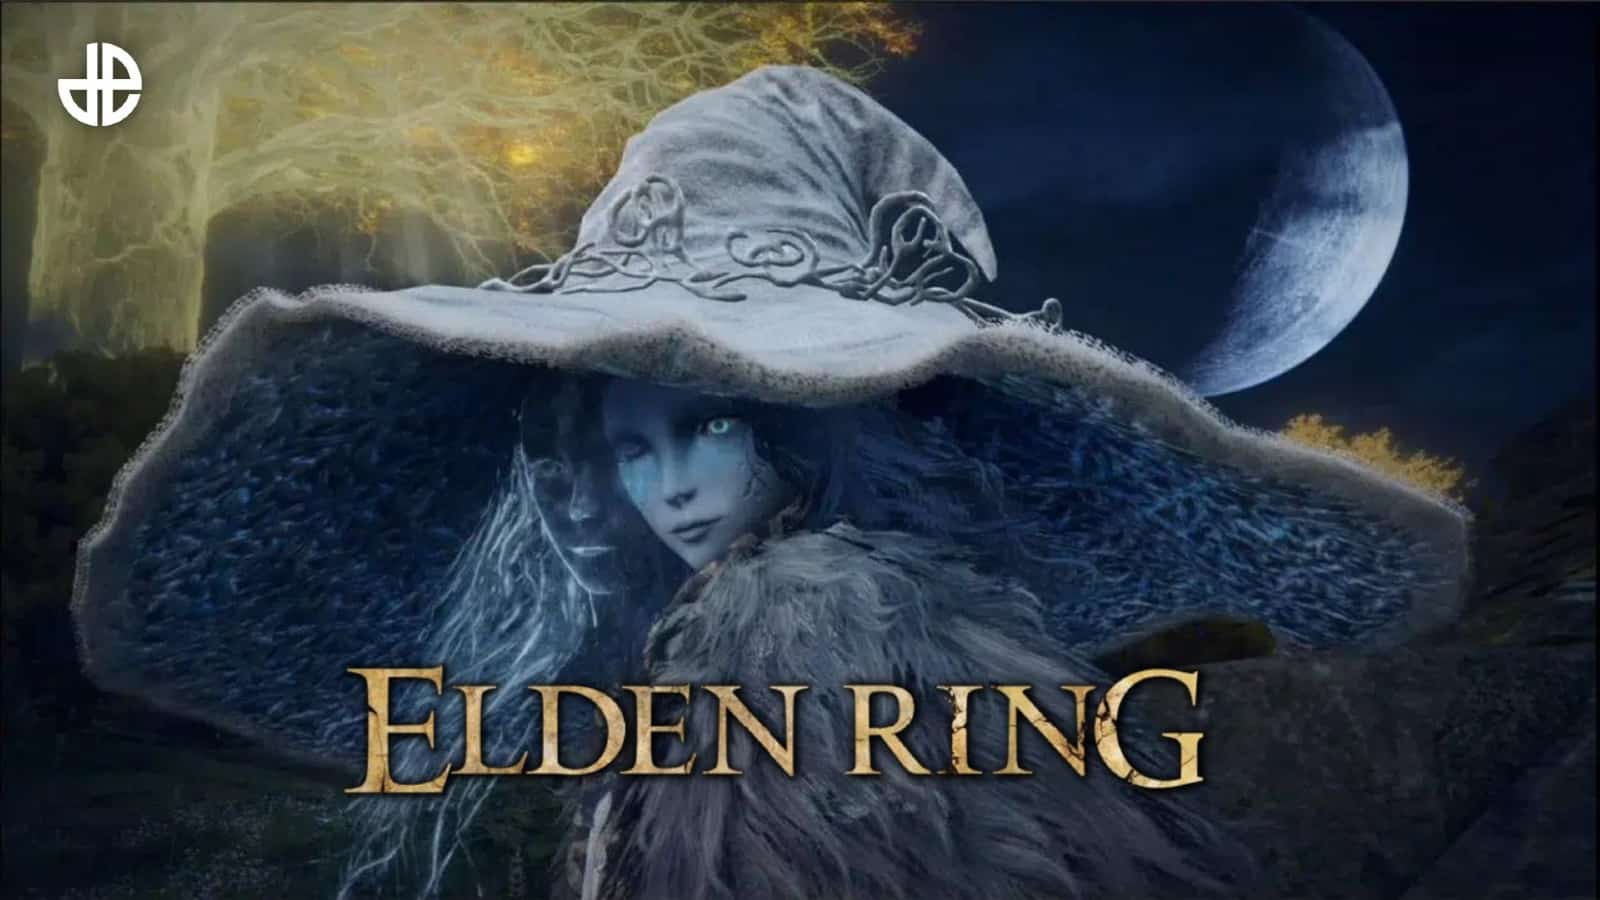 Elden Ring Ranni quest and how to get the Dark Moon Ring and